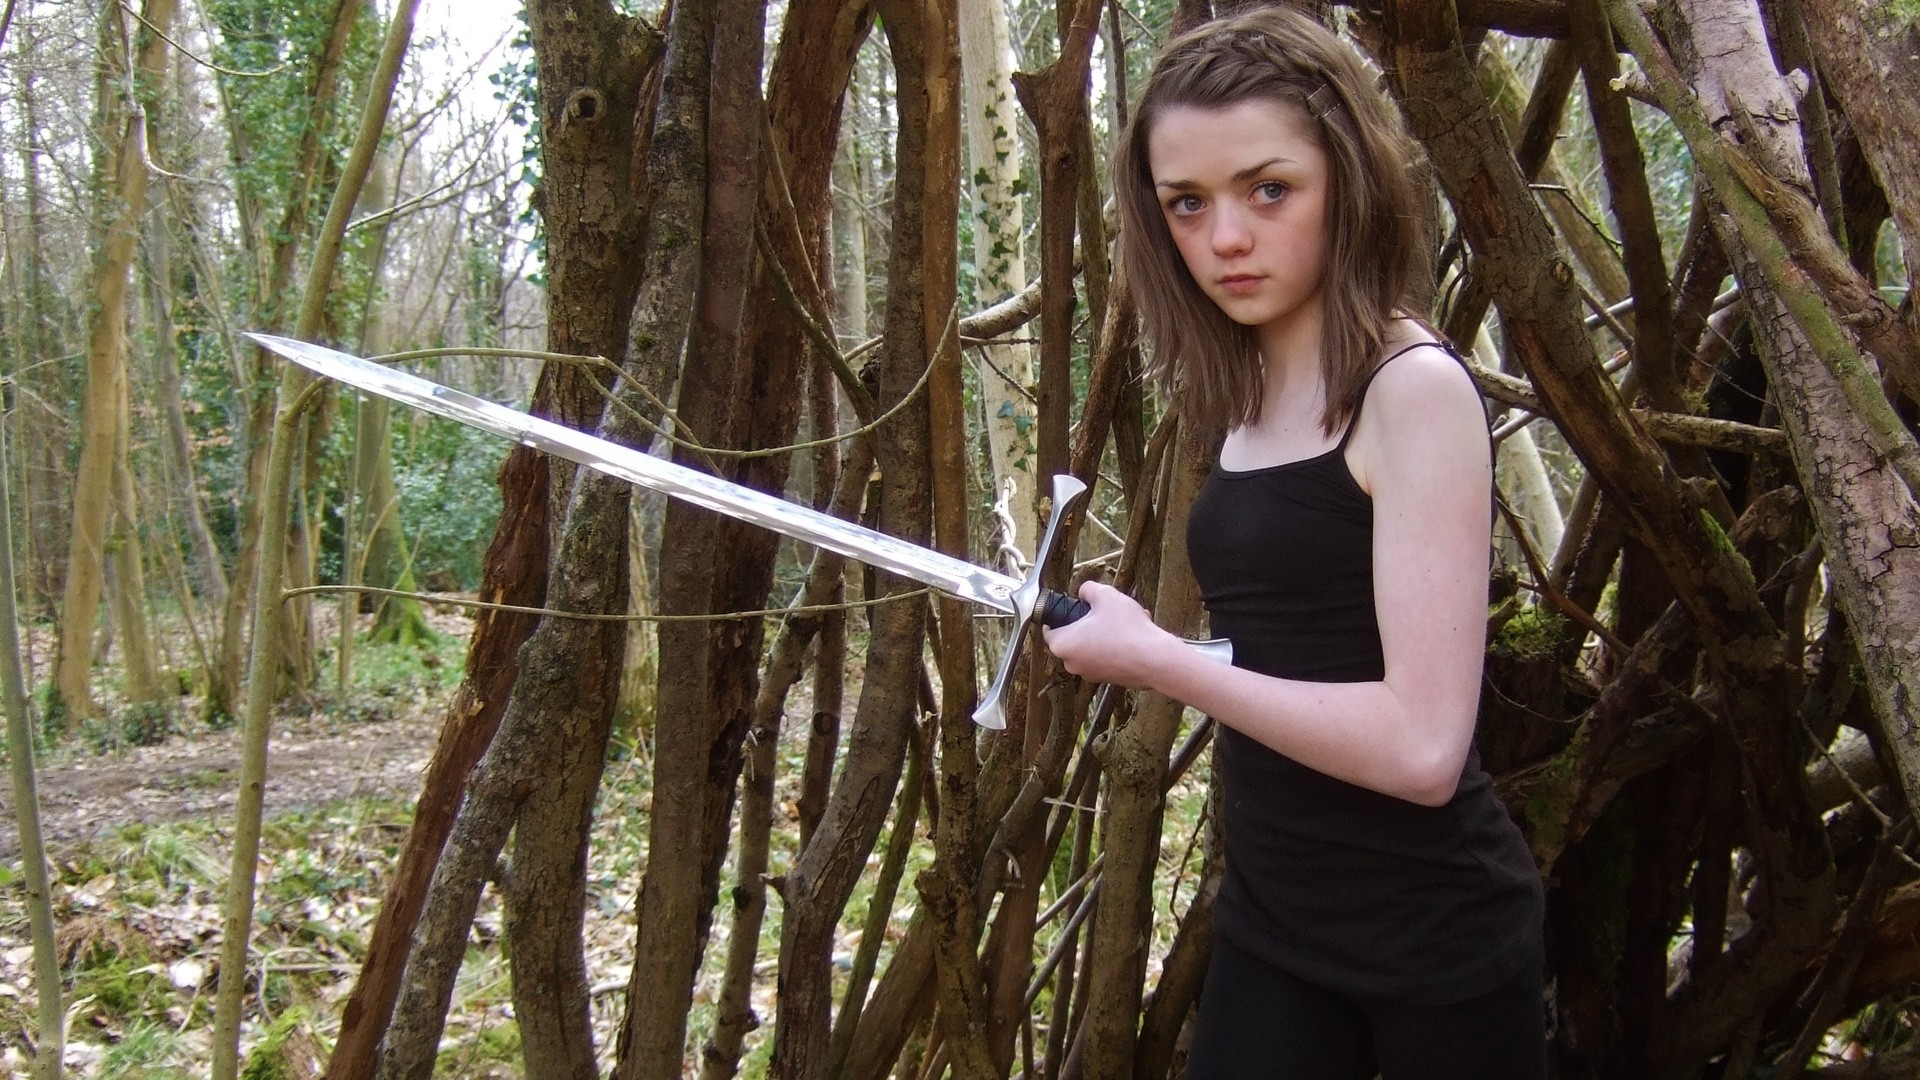 A fierce character from the popular TV show Game of Thrones - Arya Stark, played by Maisie Williams.